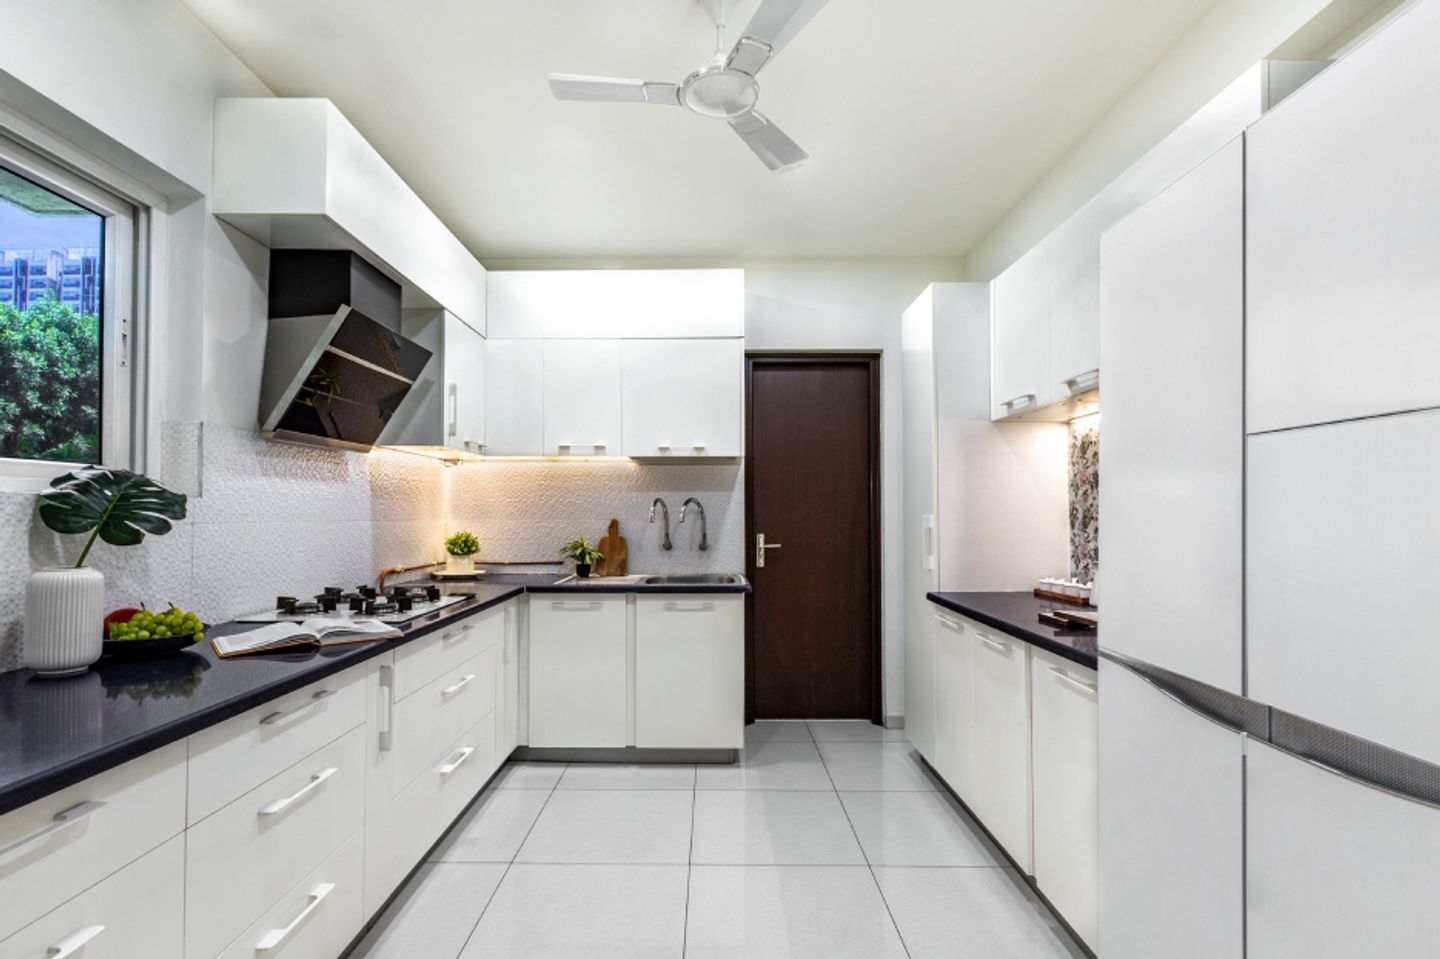 Contemporary L-Shaped Kitchen Design With Spacious White Cabinets